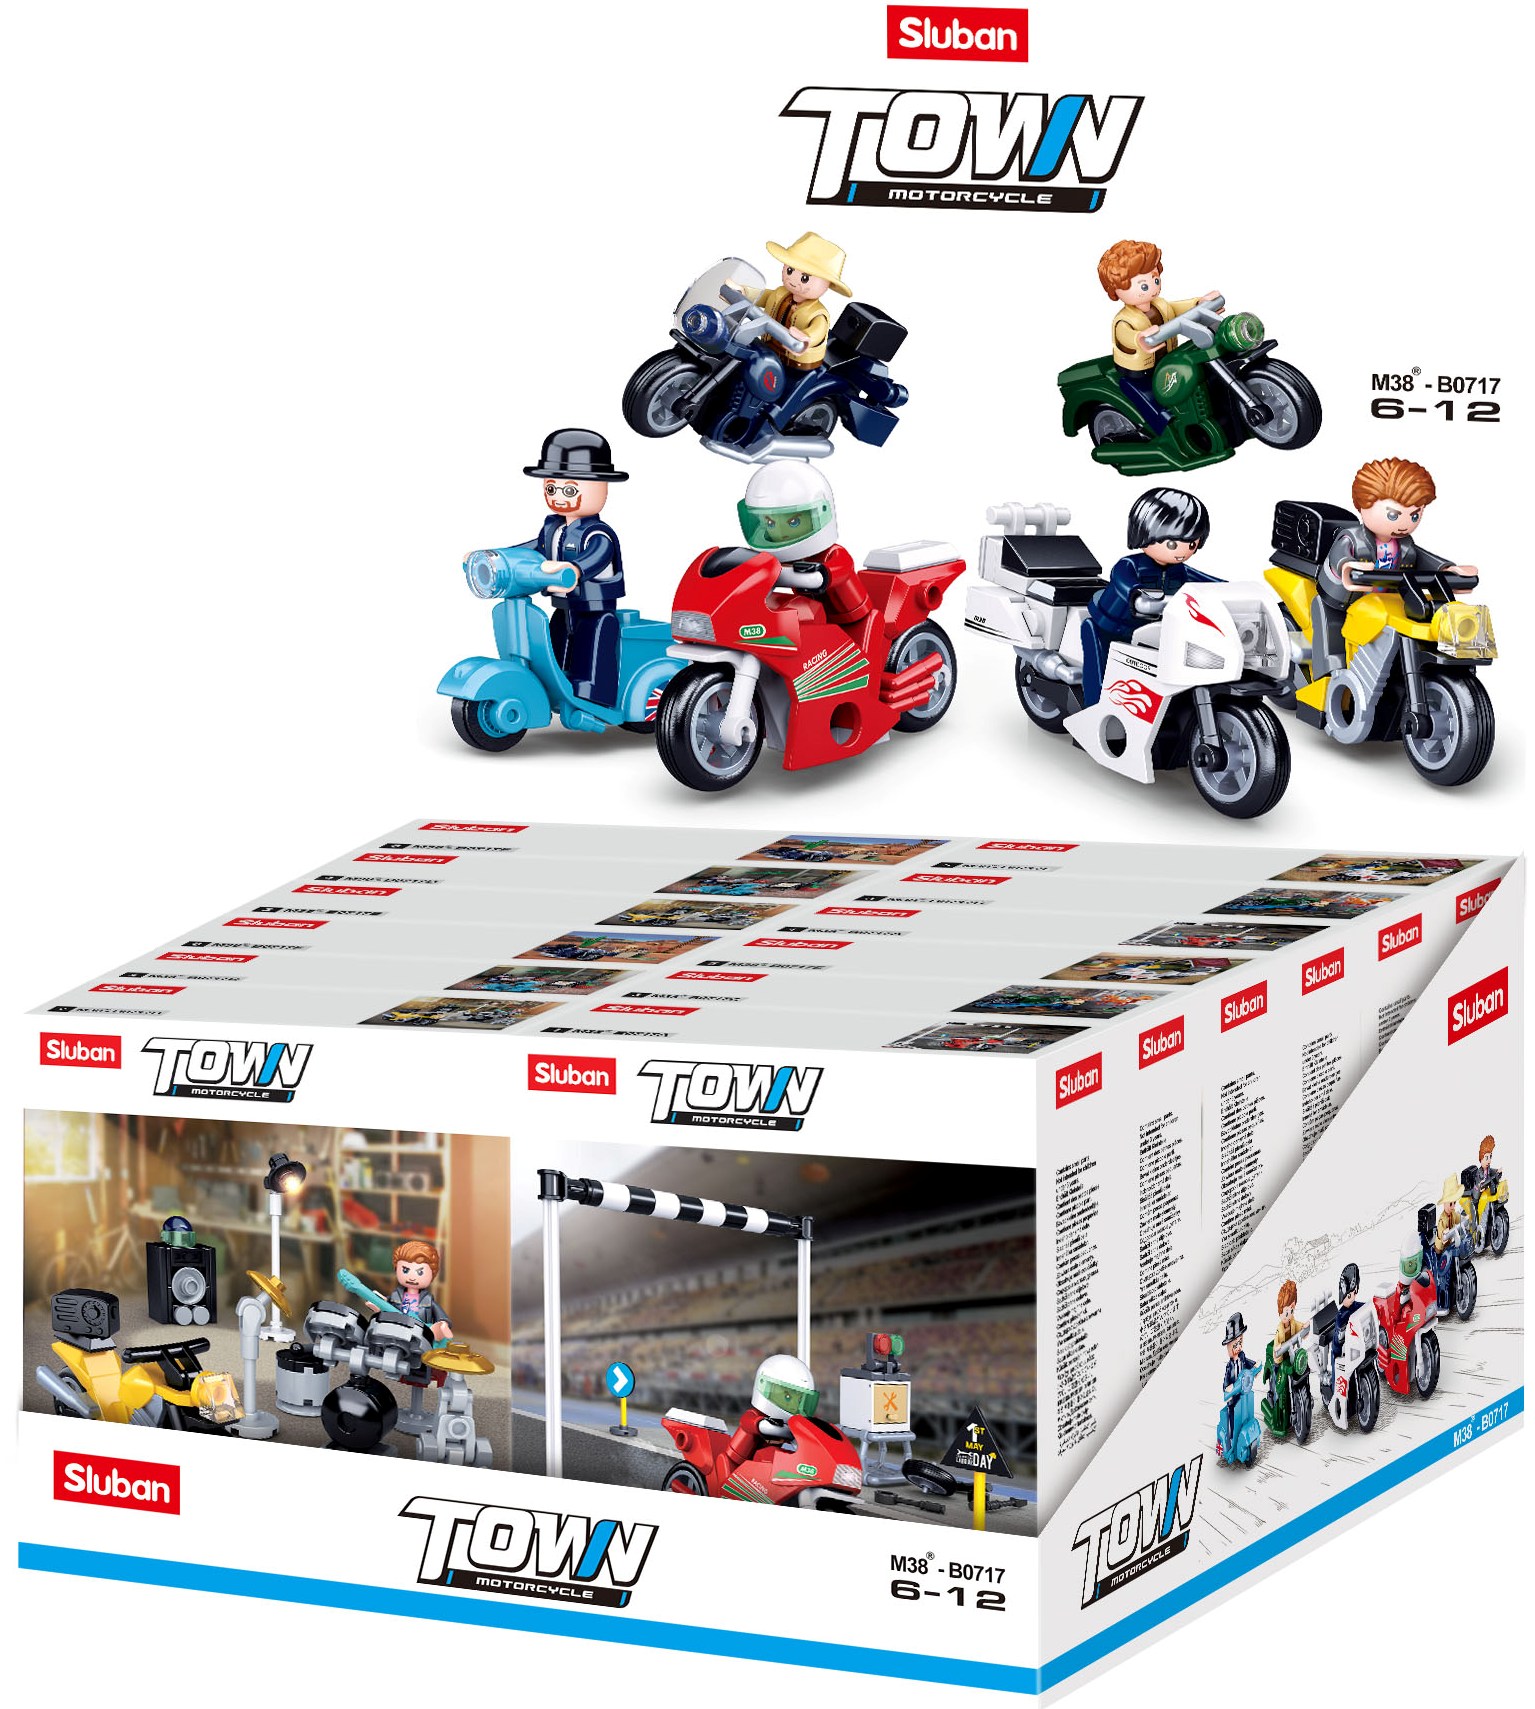 a box of toy motorcycles